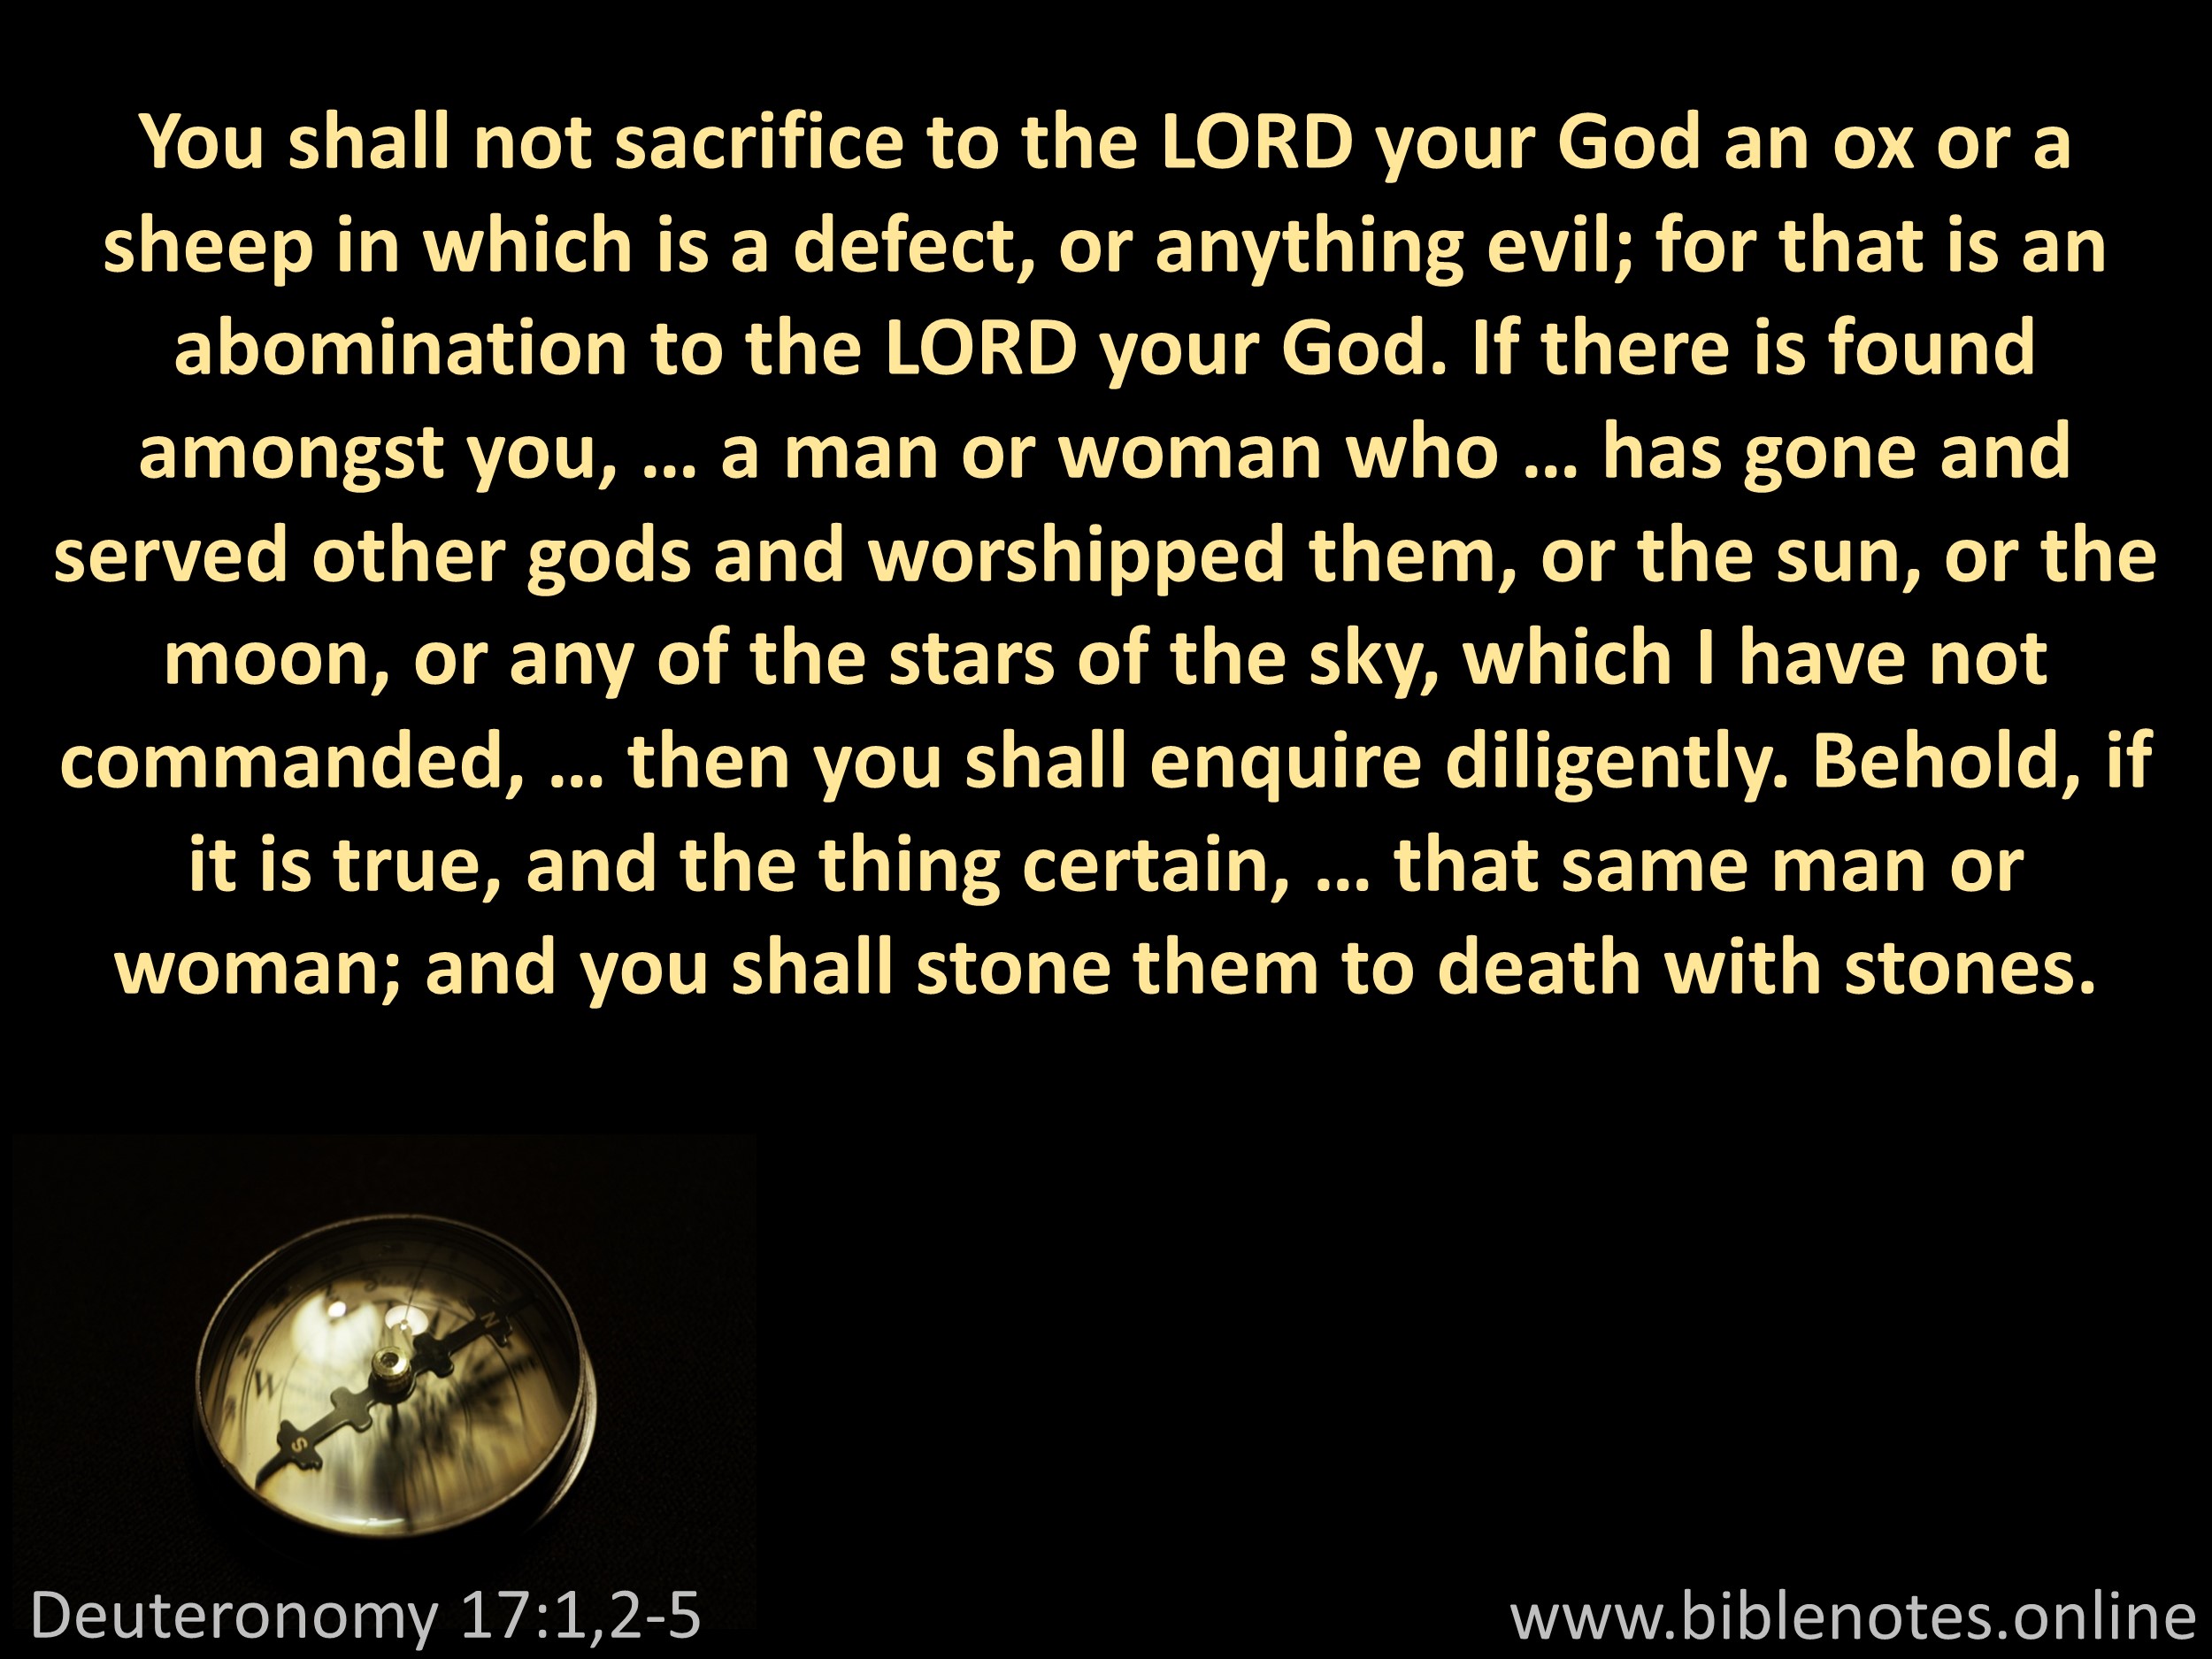 Bible Verse from Deuteronomy Chapter 17